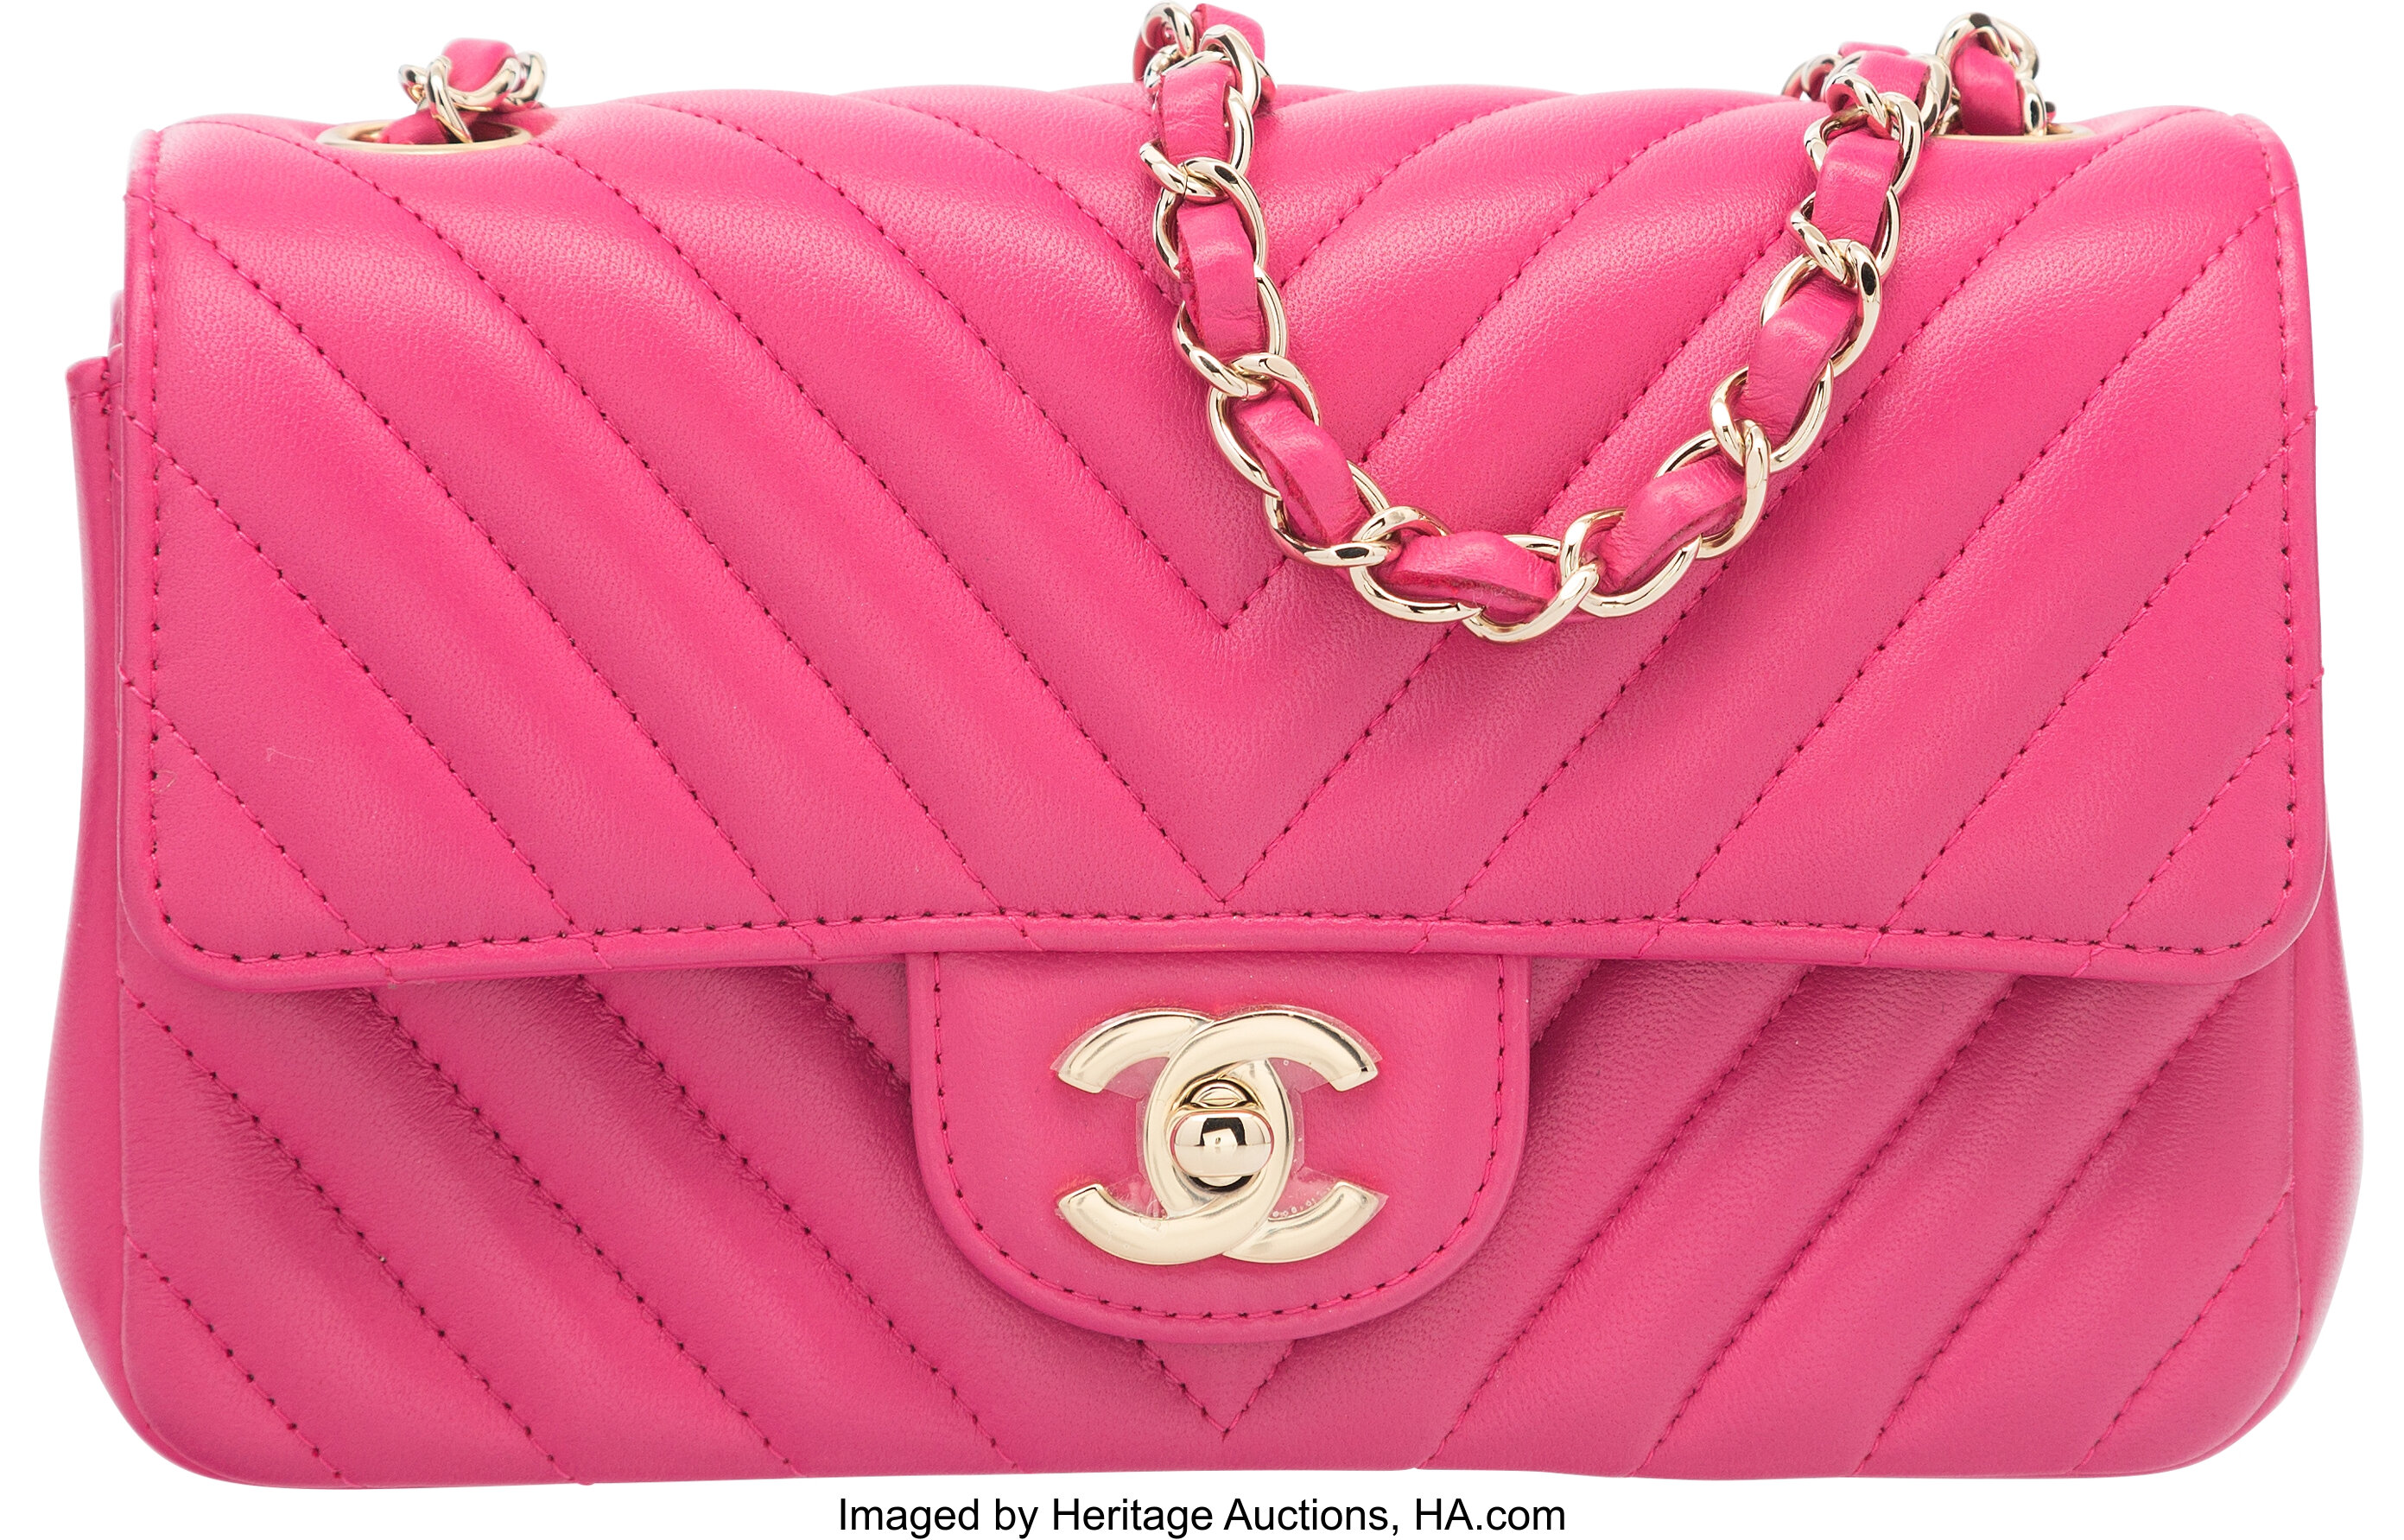 Chanel Chevron Pink Lambskin Mini Flap Bag - Handbag | Pre-owned & Certified | used Second Hand | Unisex